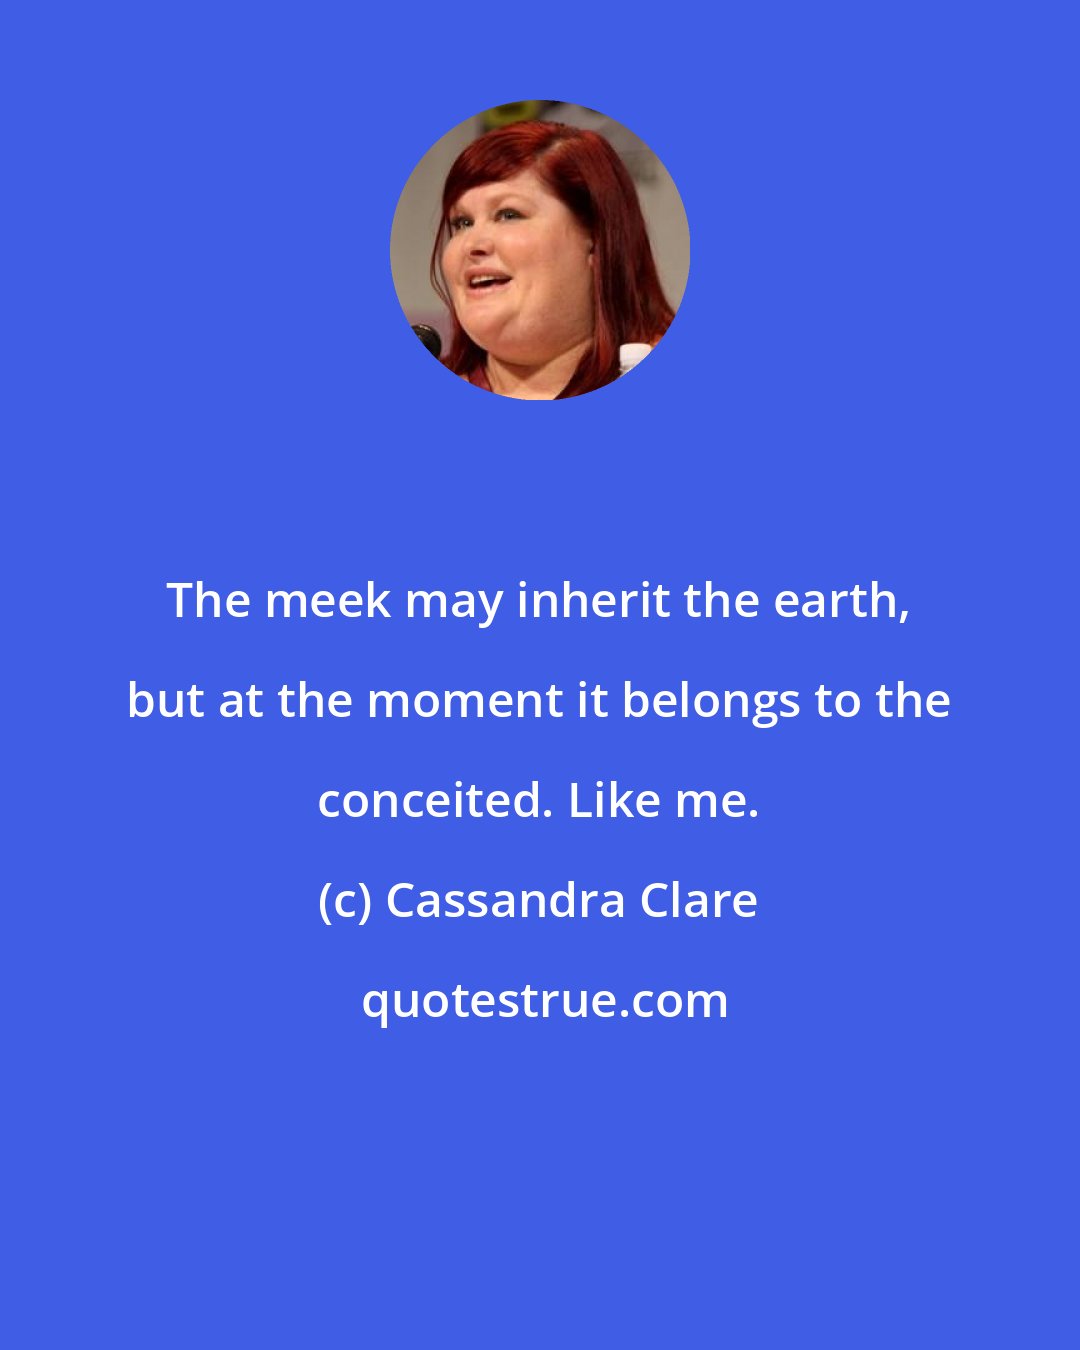 Cassandra Clare: The meek may inherit the earth, but at the moment it belongs to the conceited. Like me.